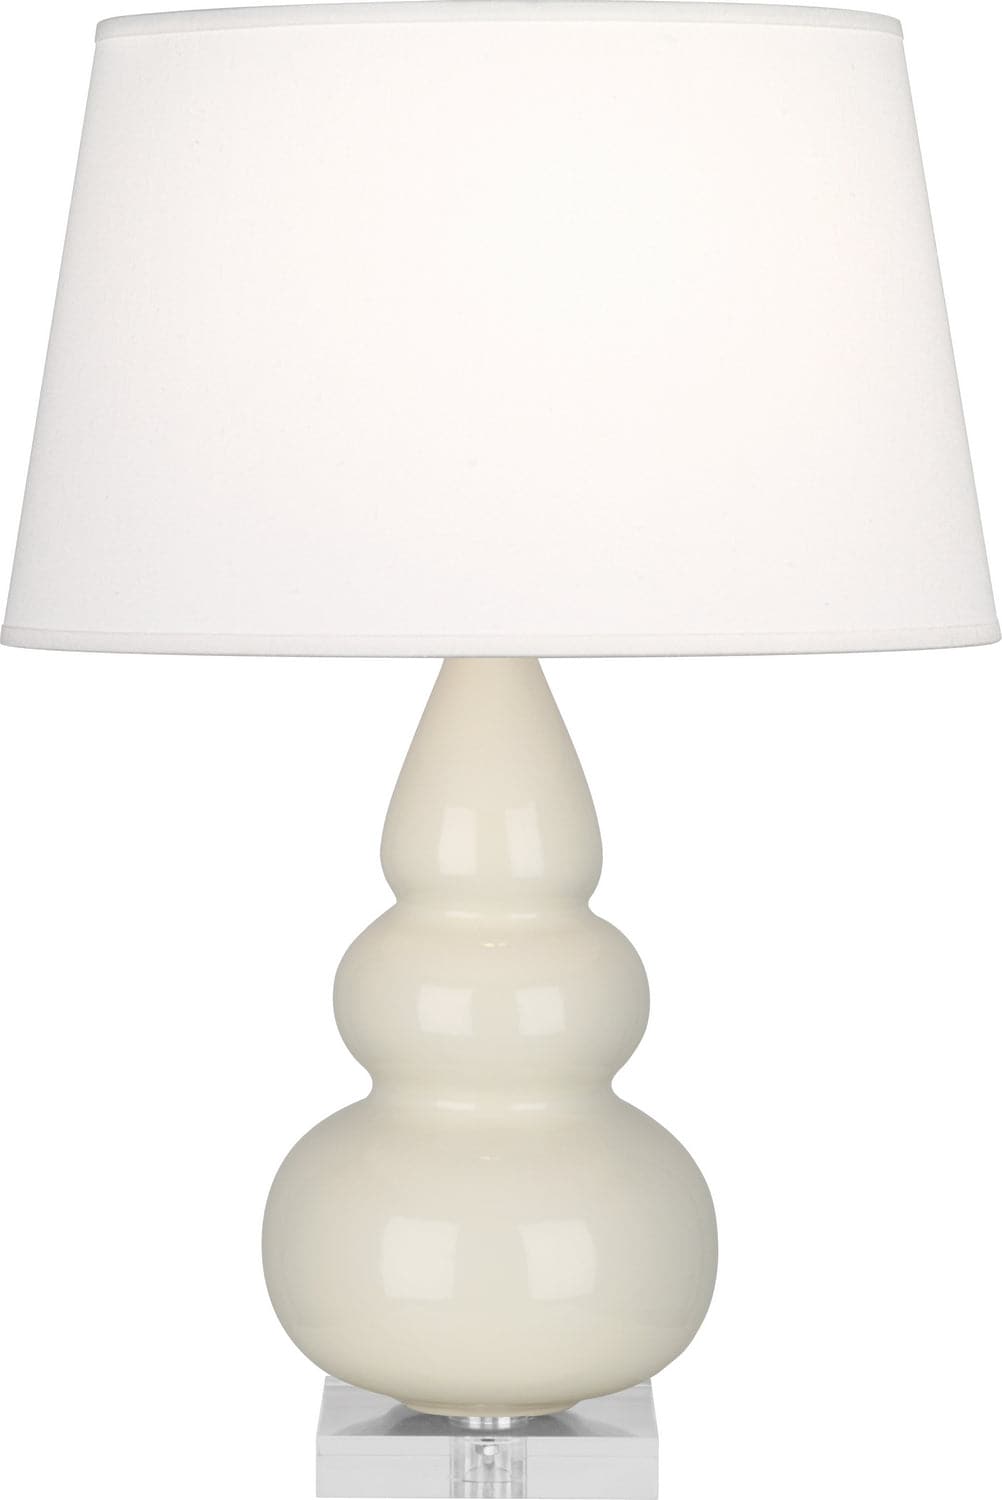 Robert Abbey - A294X - One Light Accent Lamp - Small Triple Gourd - Bone Glazed w/Lucite Base